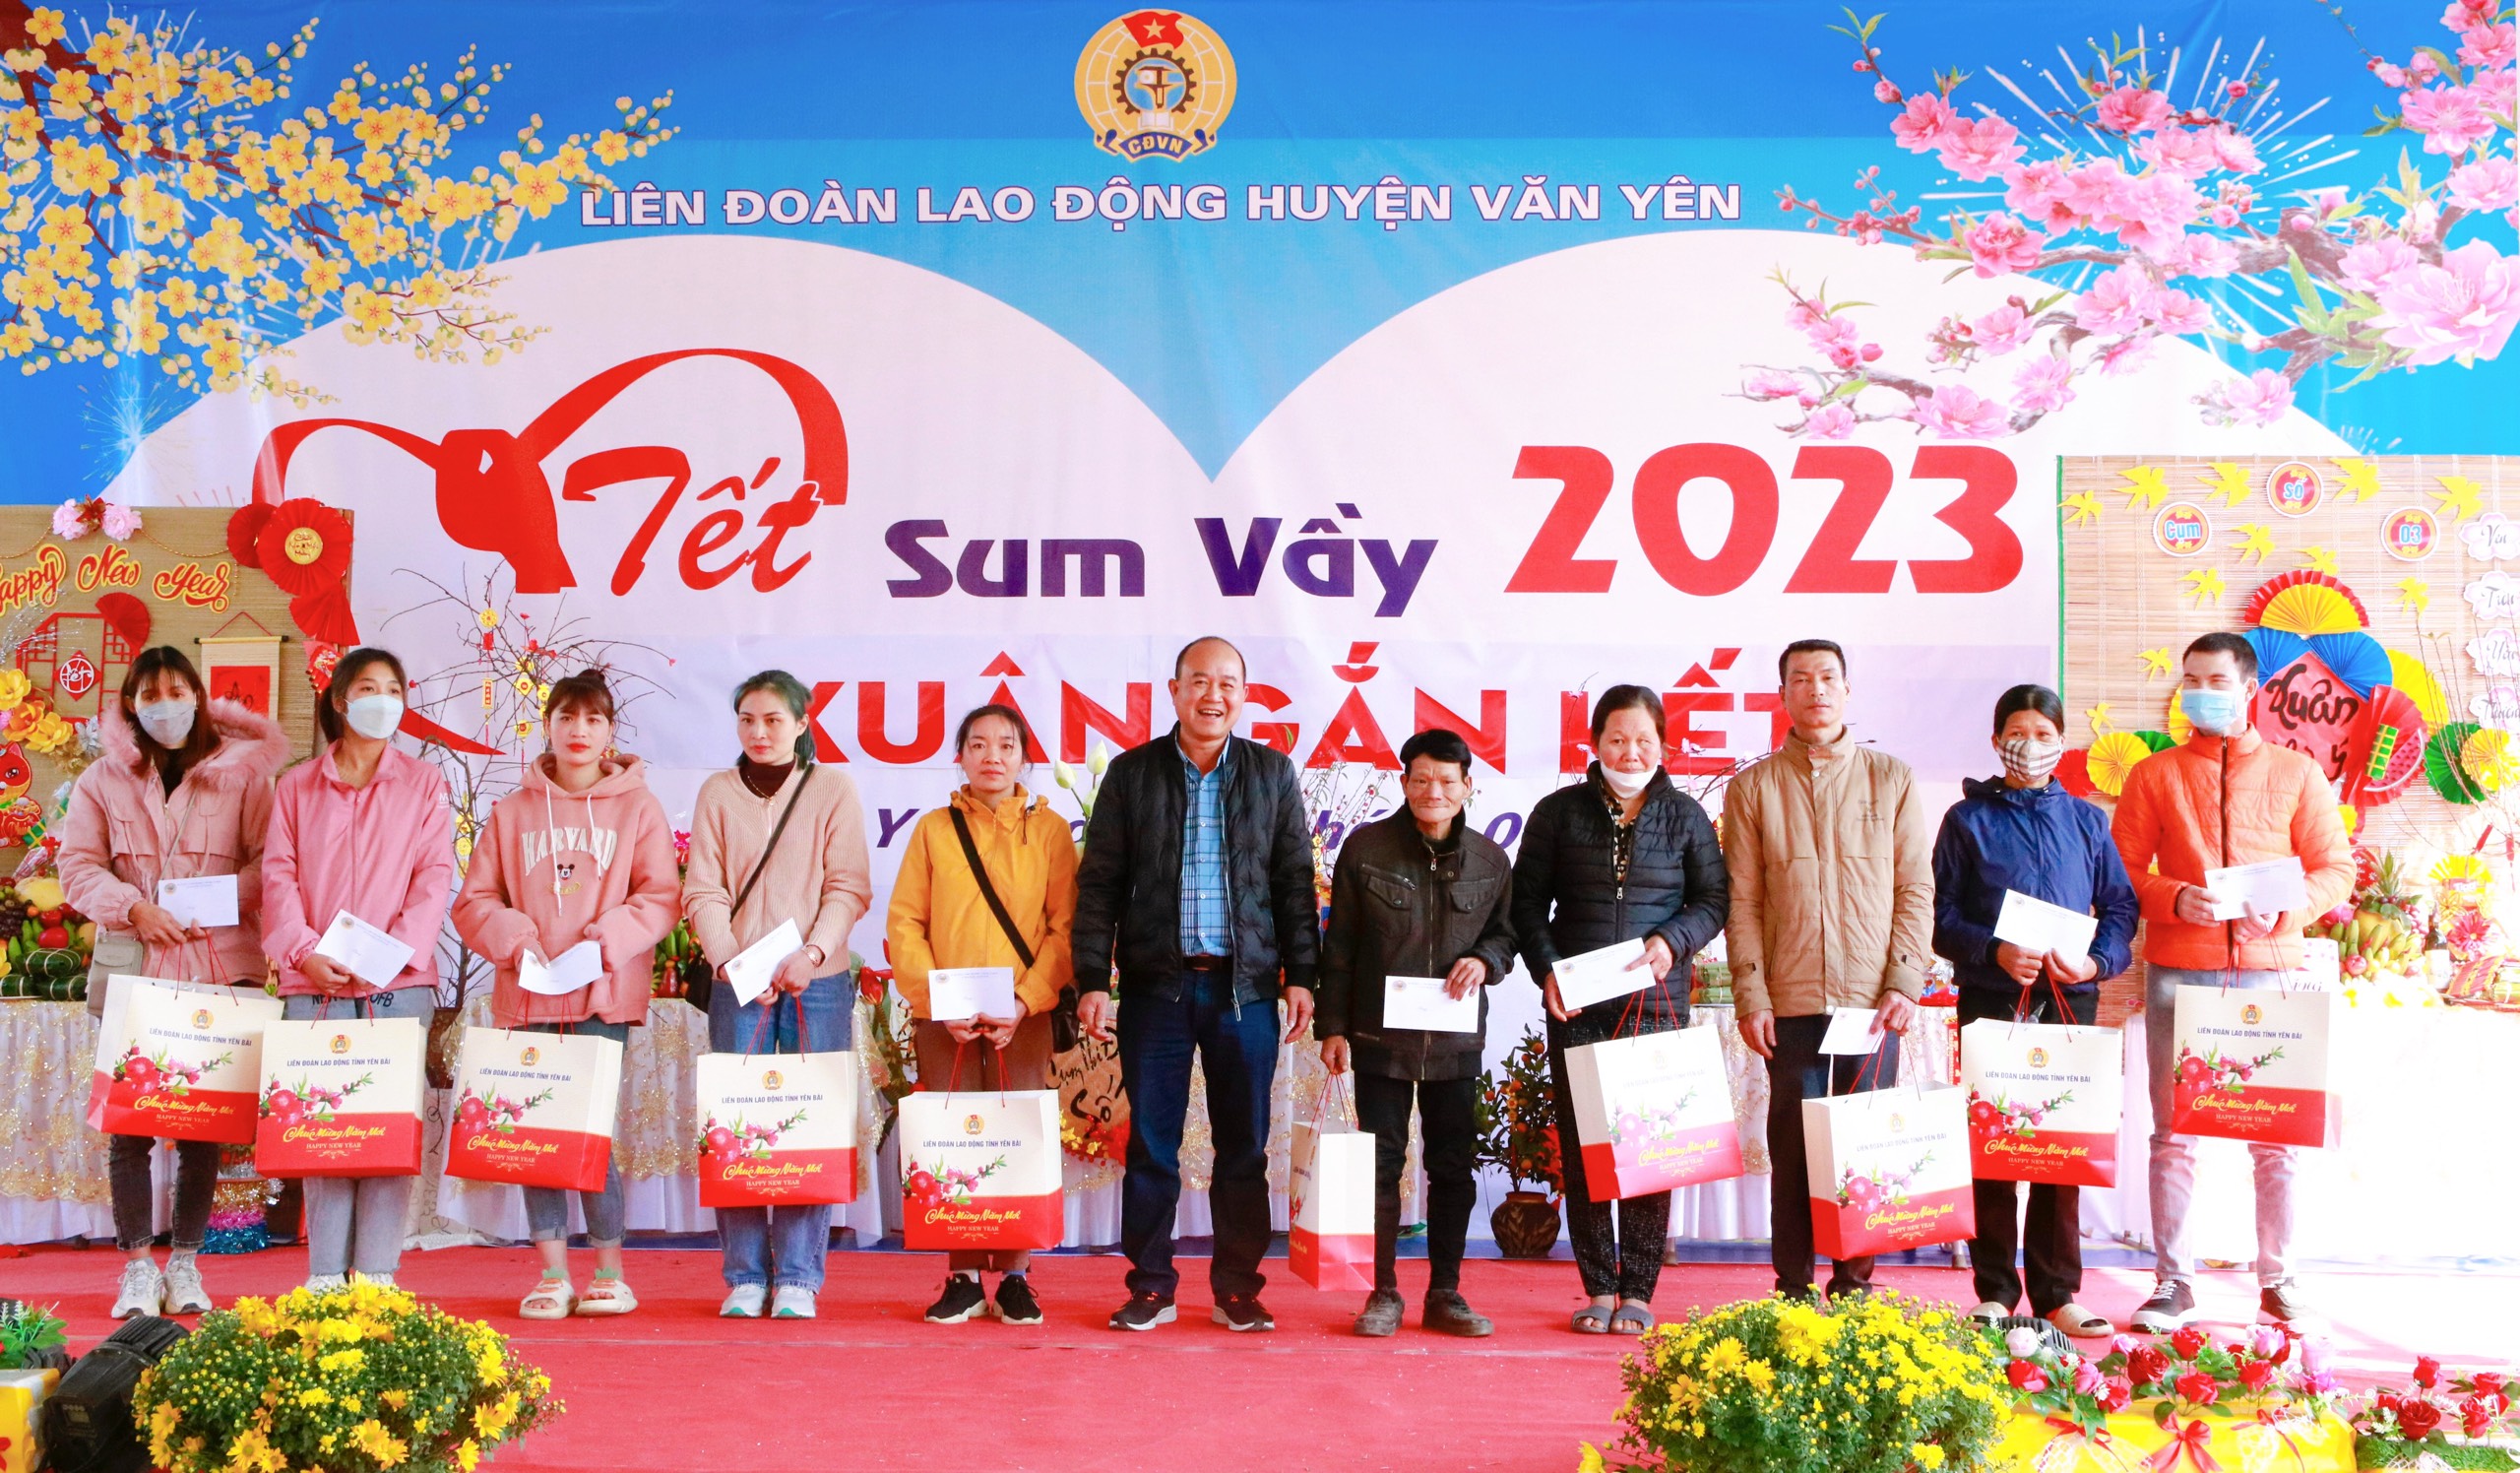 Visimex gave Tet gifts to the poor farmers in VAN YEN DISTRICT - YEN BAI PROVINCE.